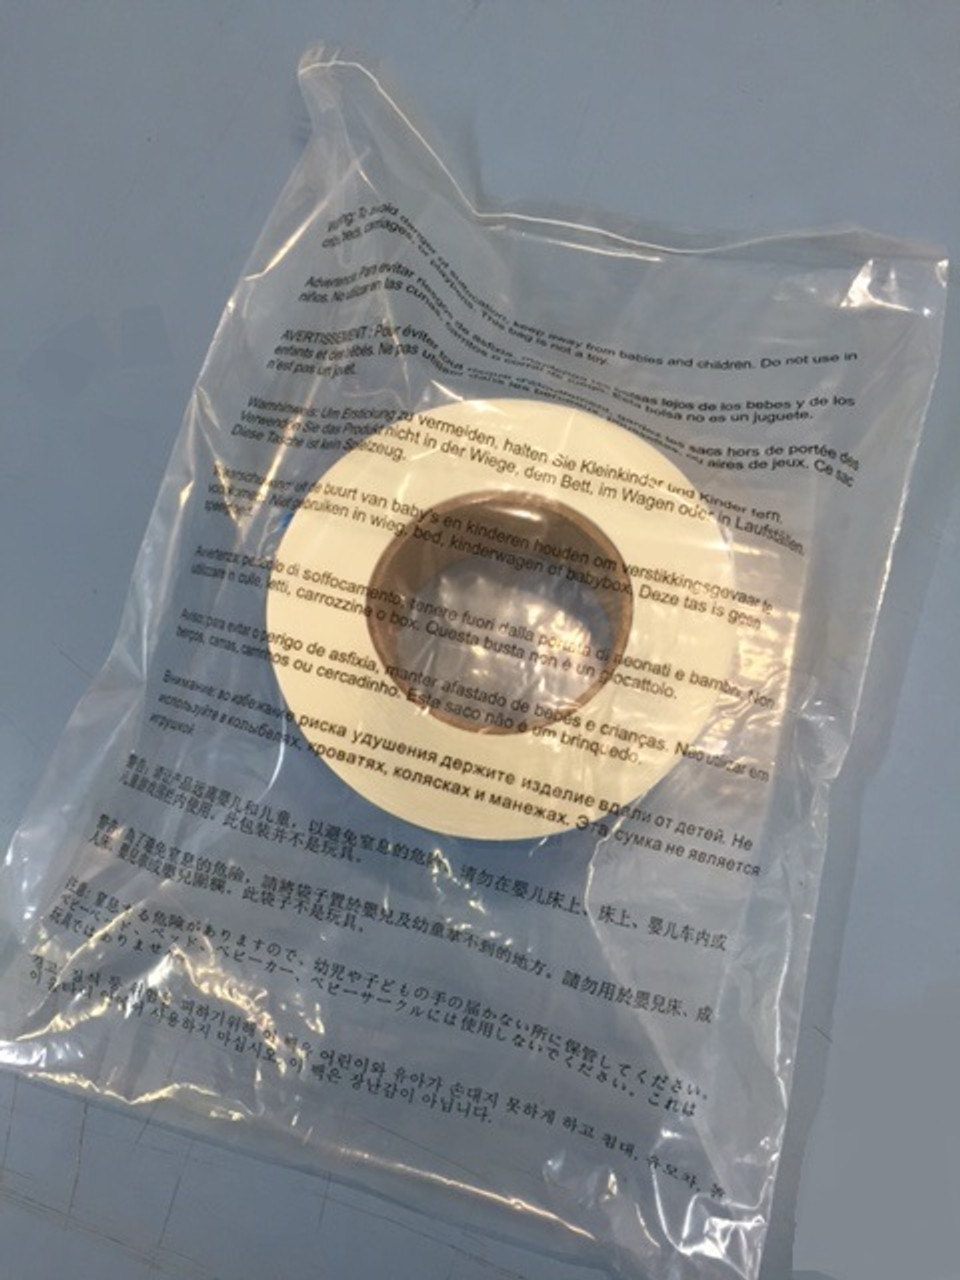 Clear Plastic Resealable Self-adhesive Sealing Reclosable